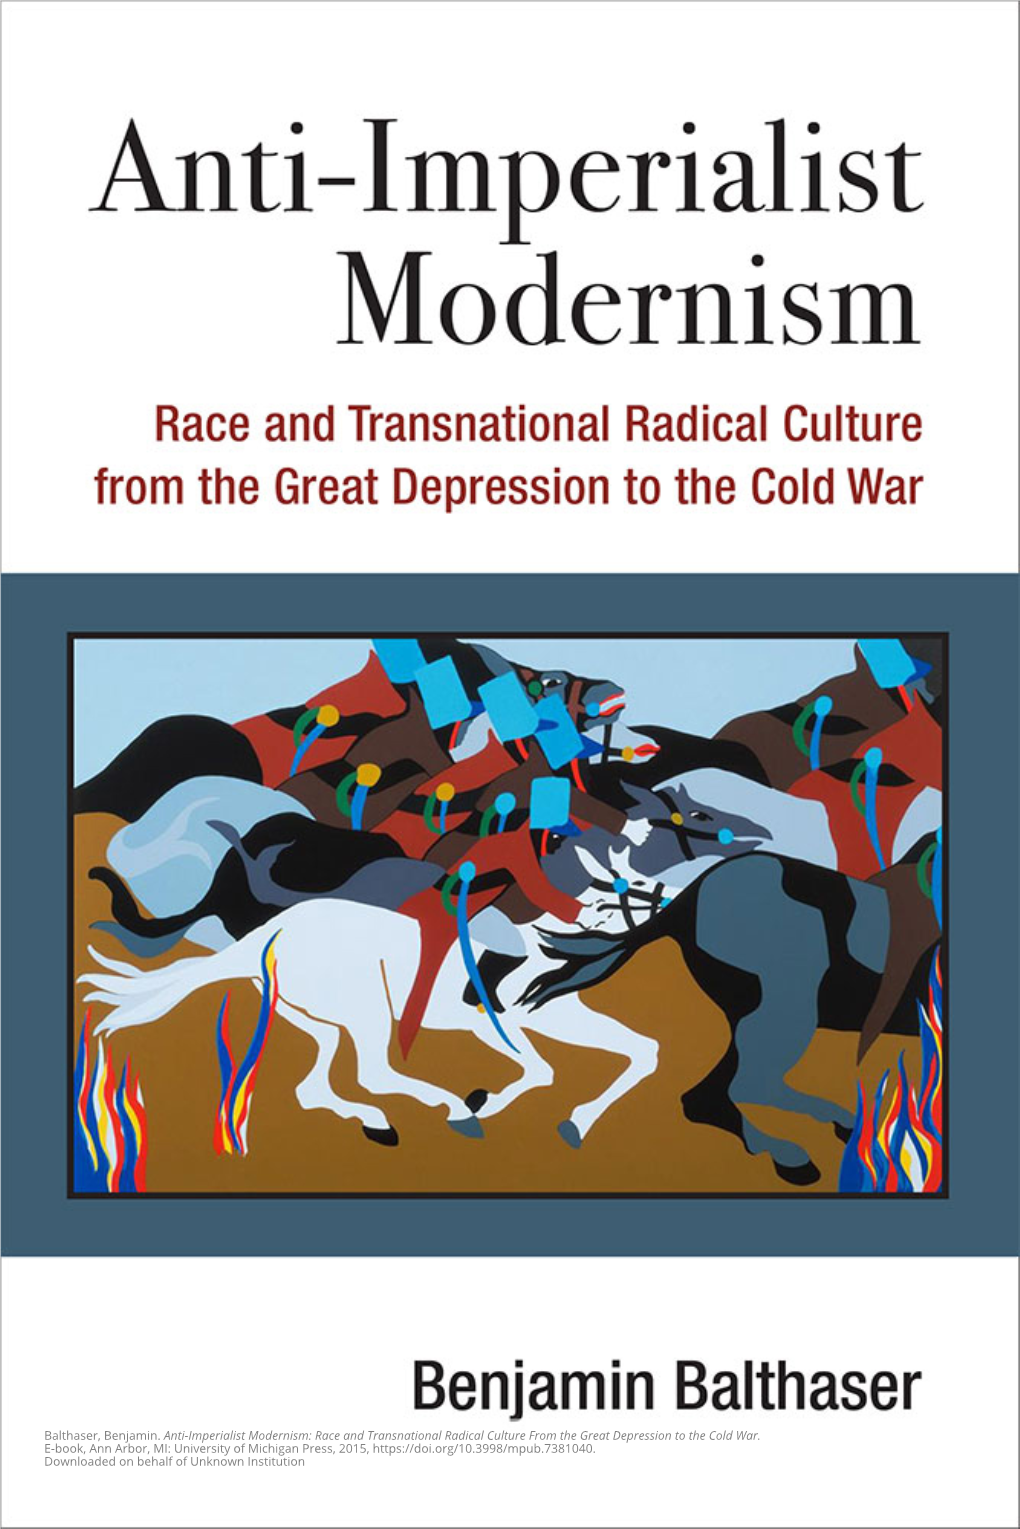 Anti-Imperialist Modernism: Race and Transnational Radical Culture from the Great Depression to the Cold War